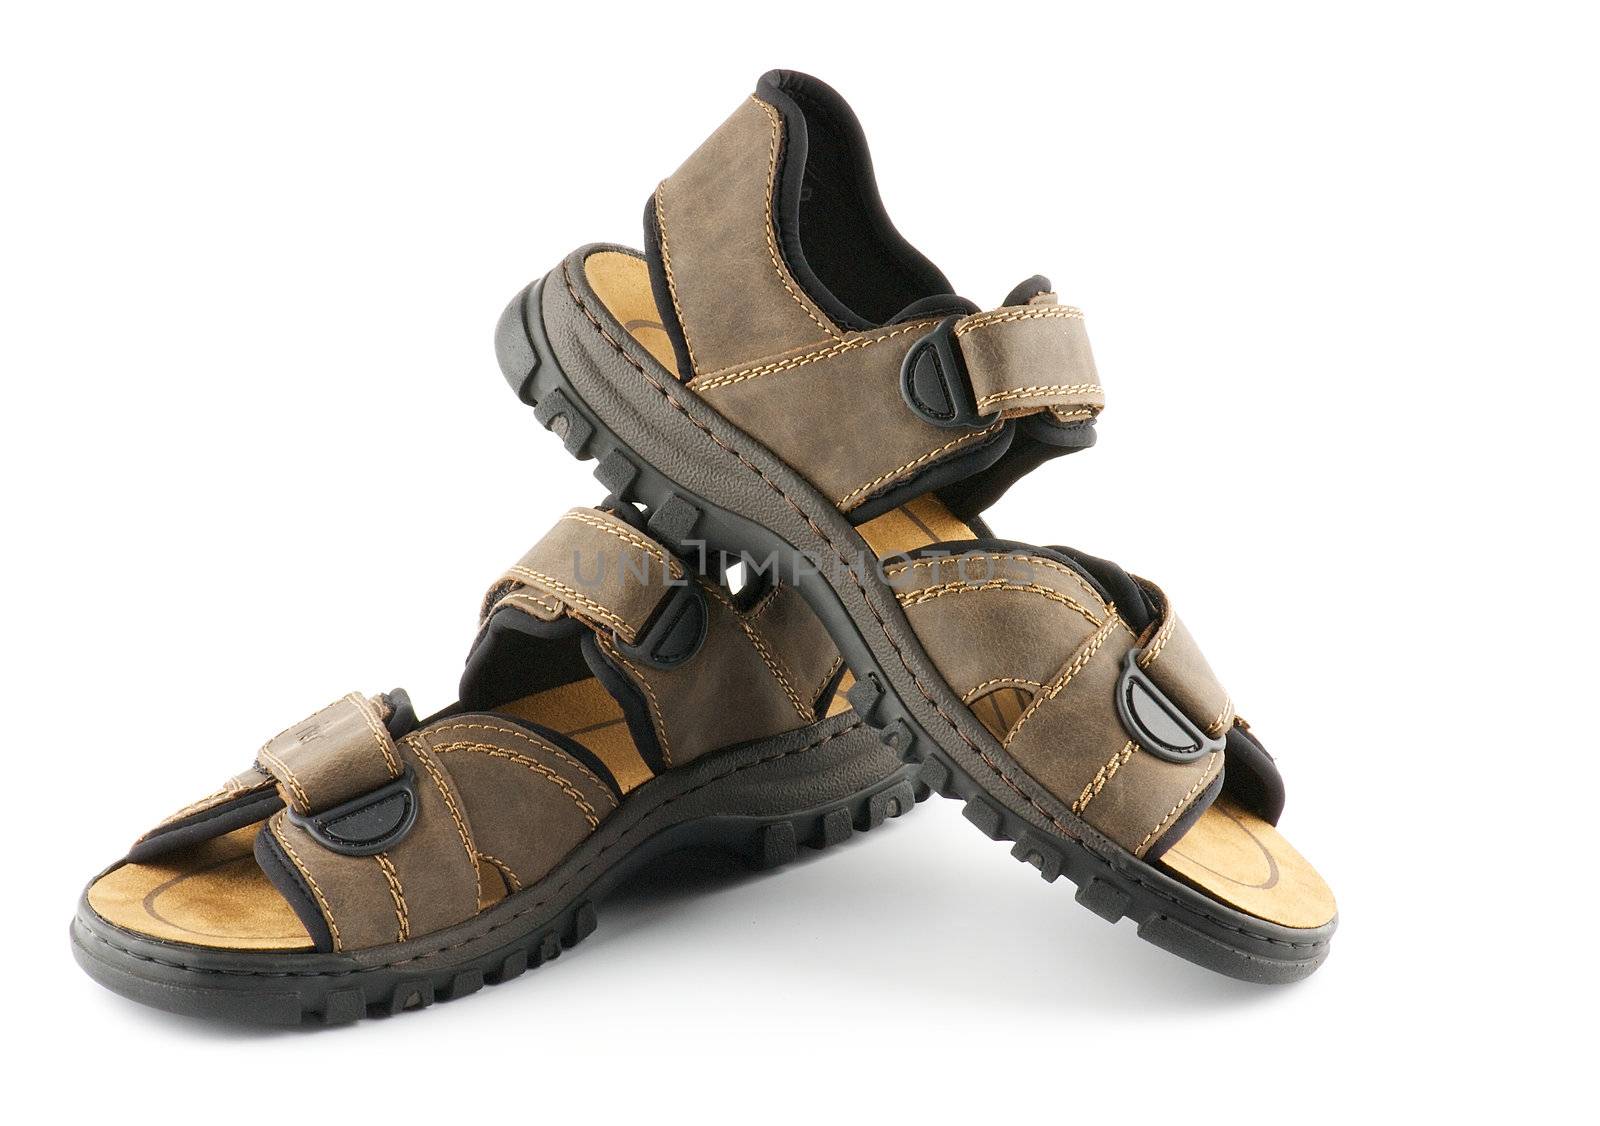 Brown man's Shoes Sandals with Velcro fastener  by zhekos